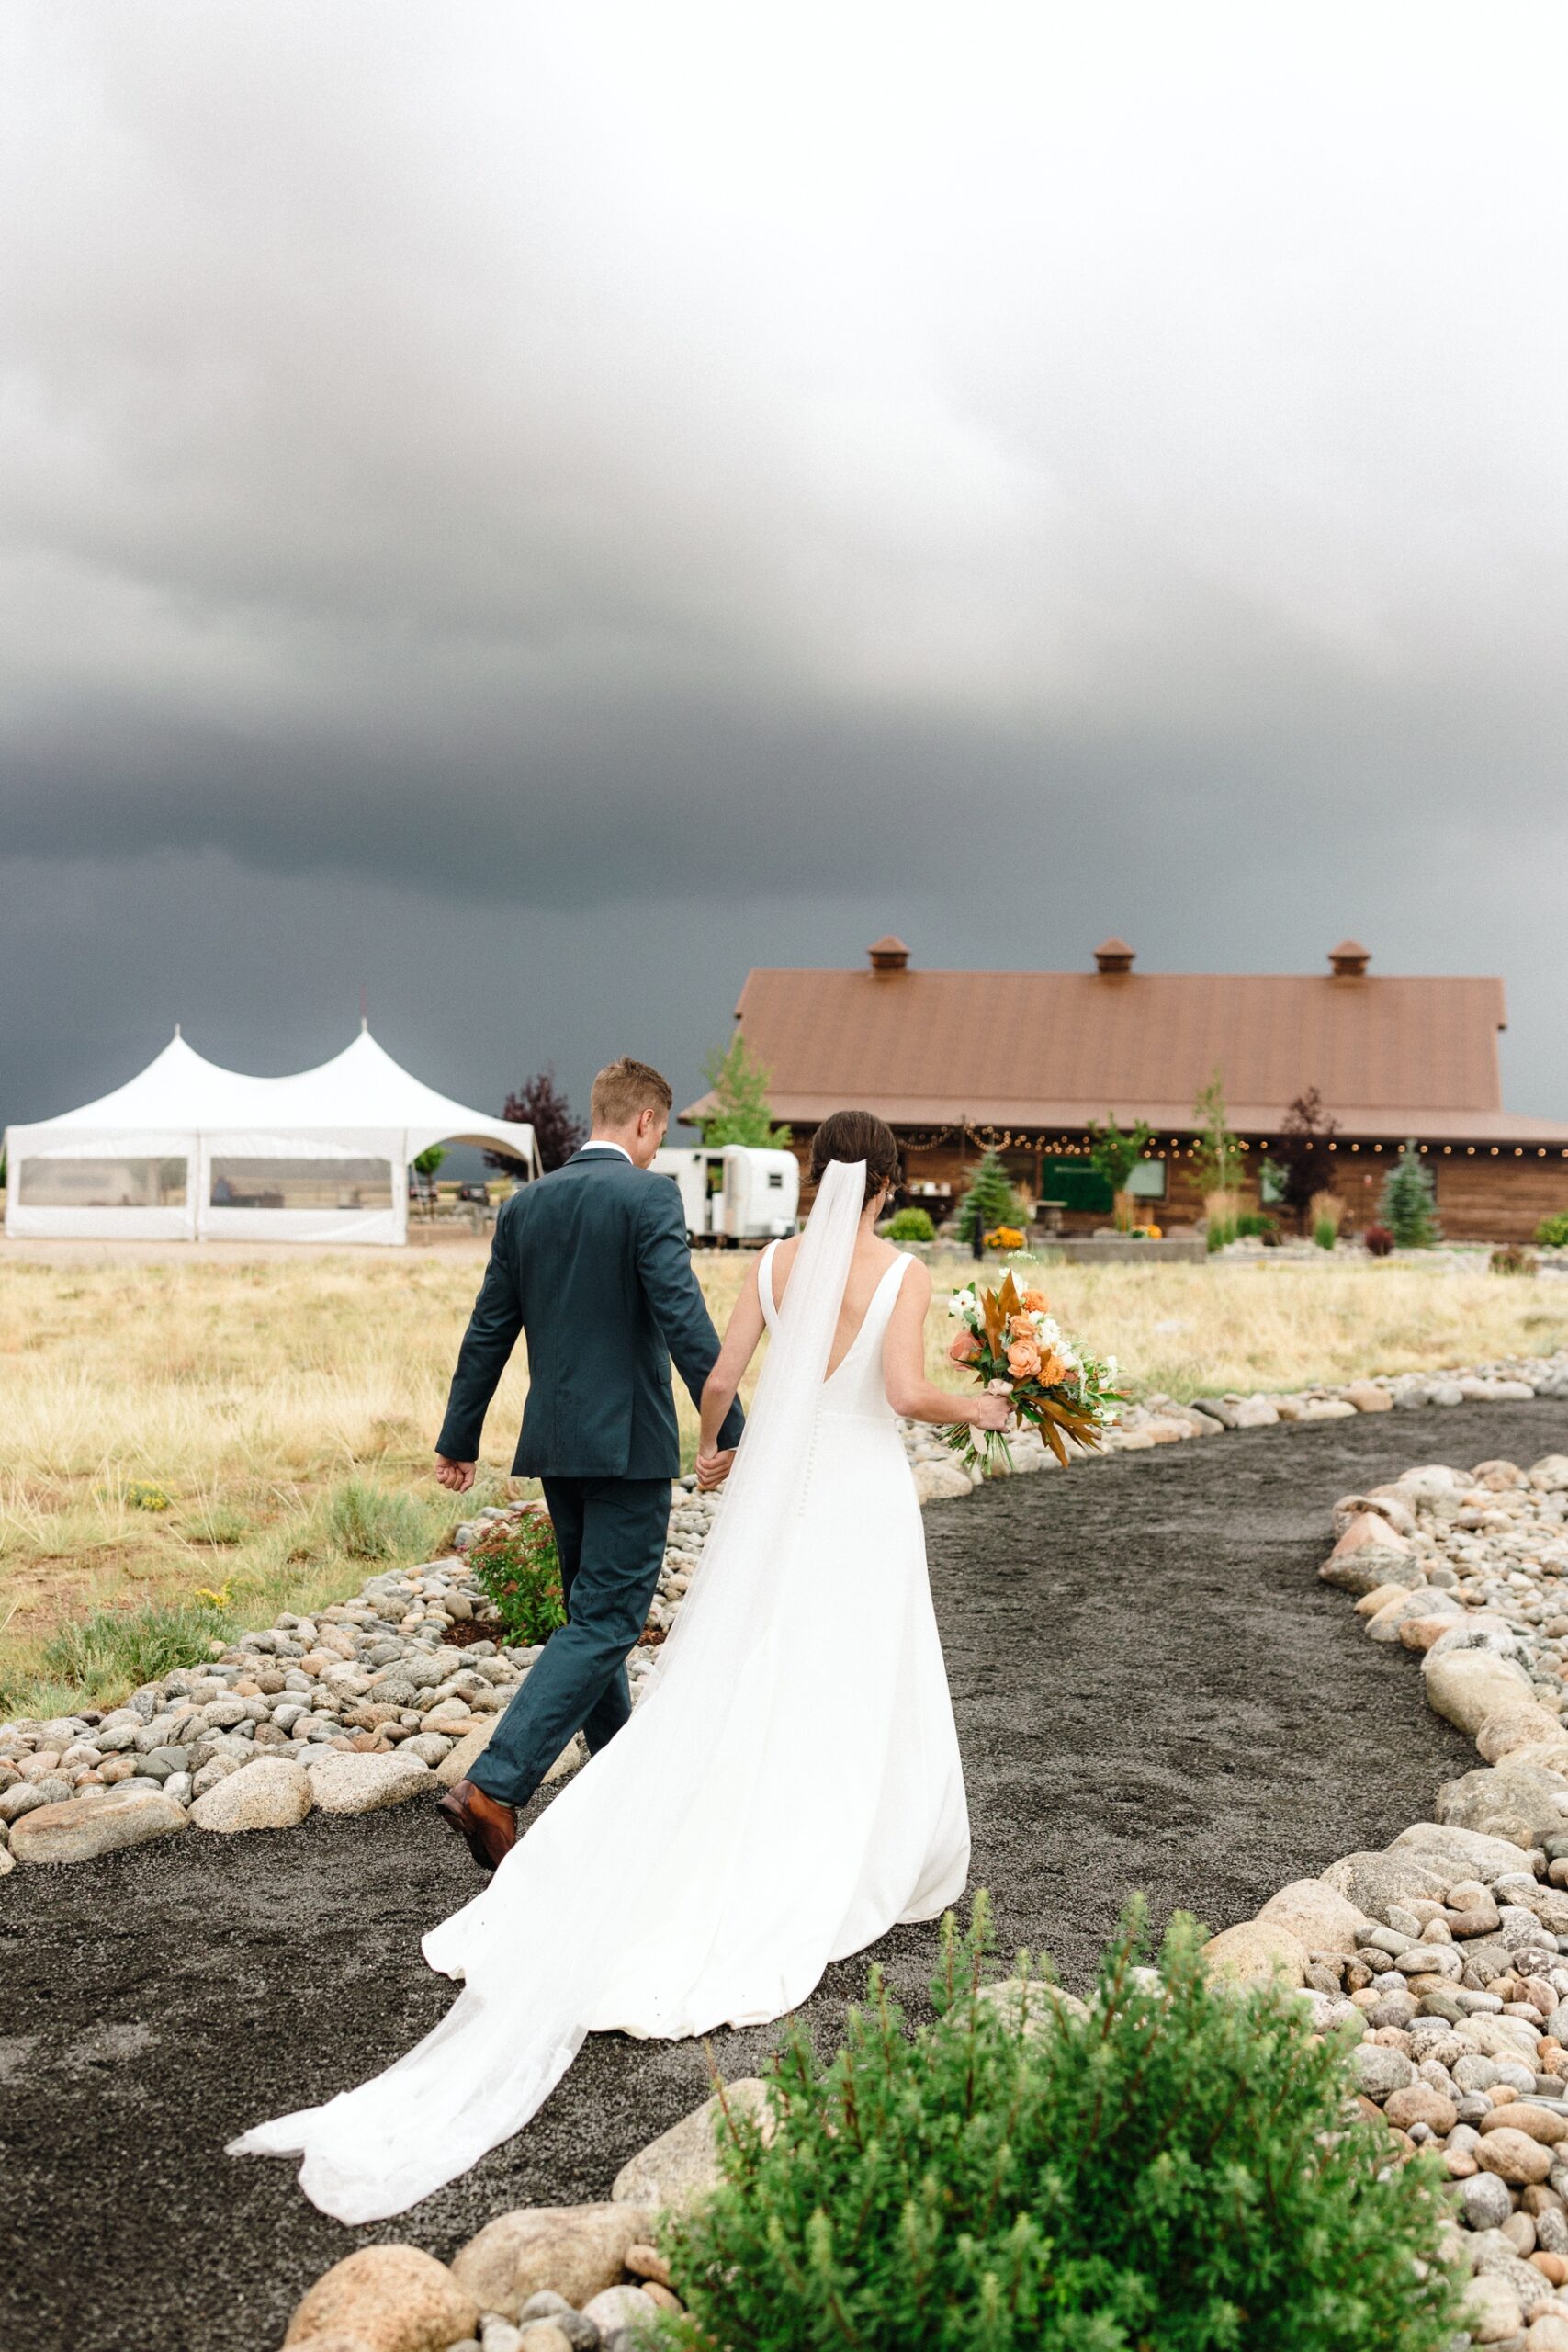 Bride and groom holding hands and walking down path with rain clouds in the background 